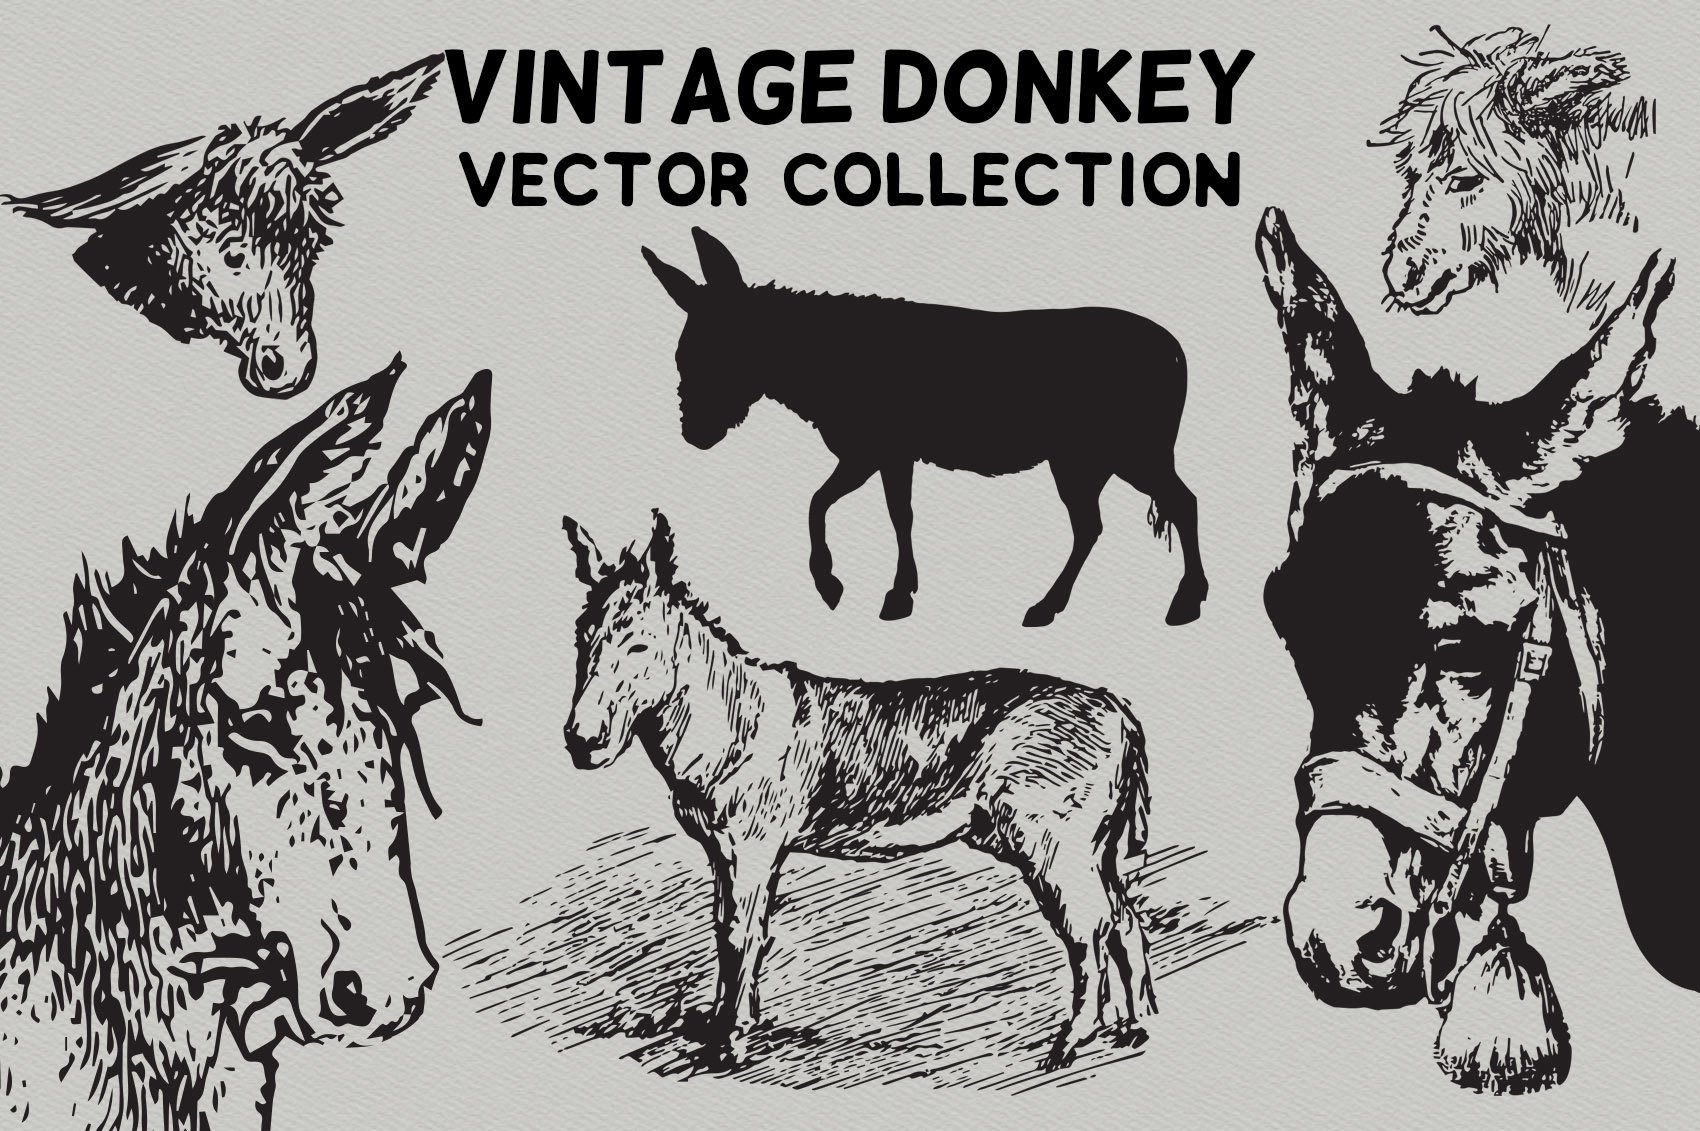 Cool donkeys in a vintage style.